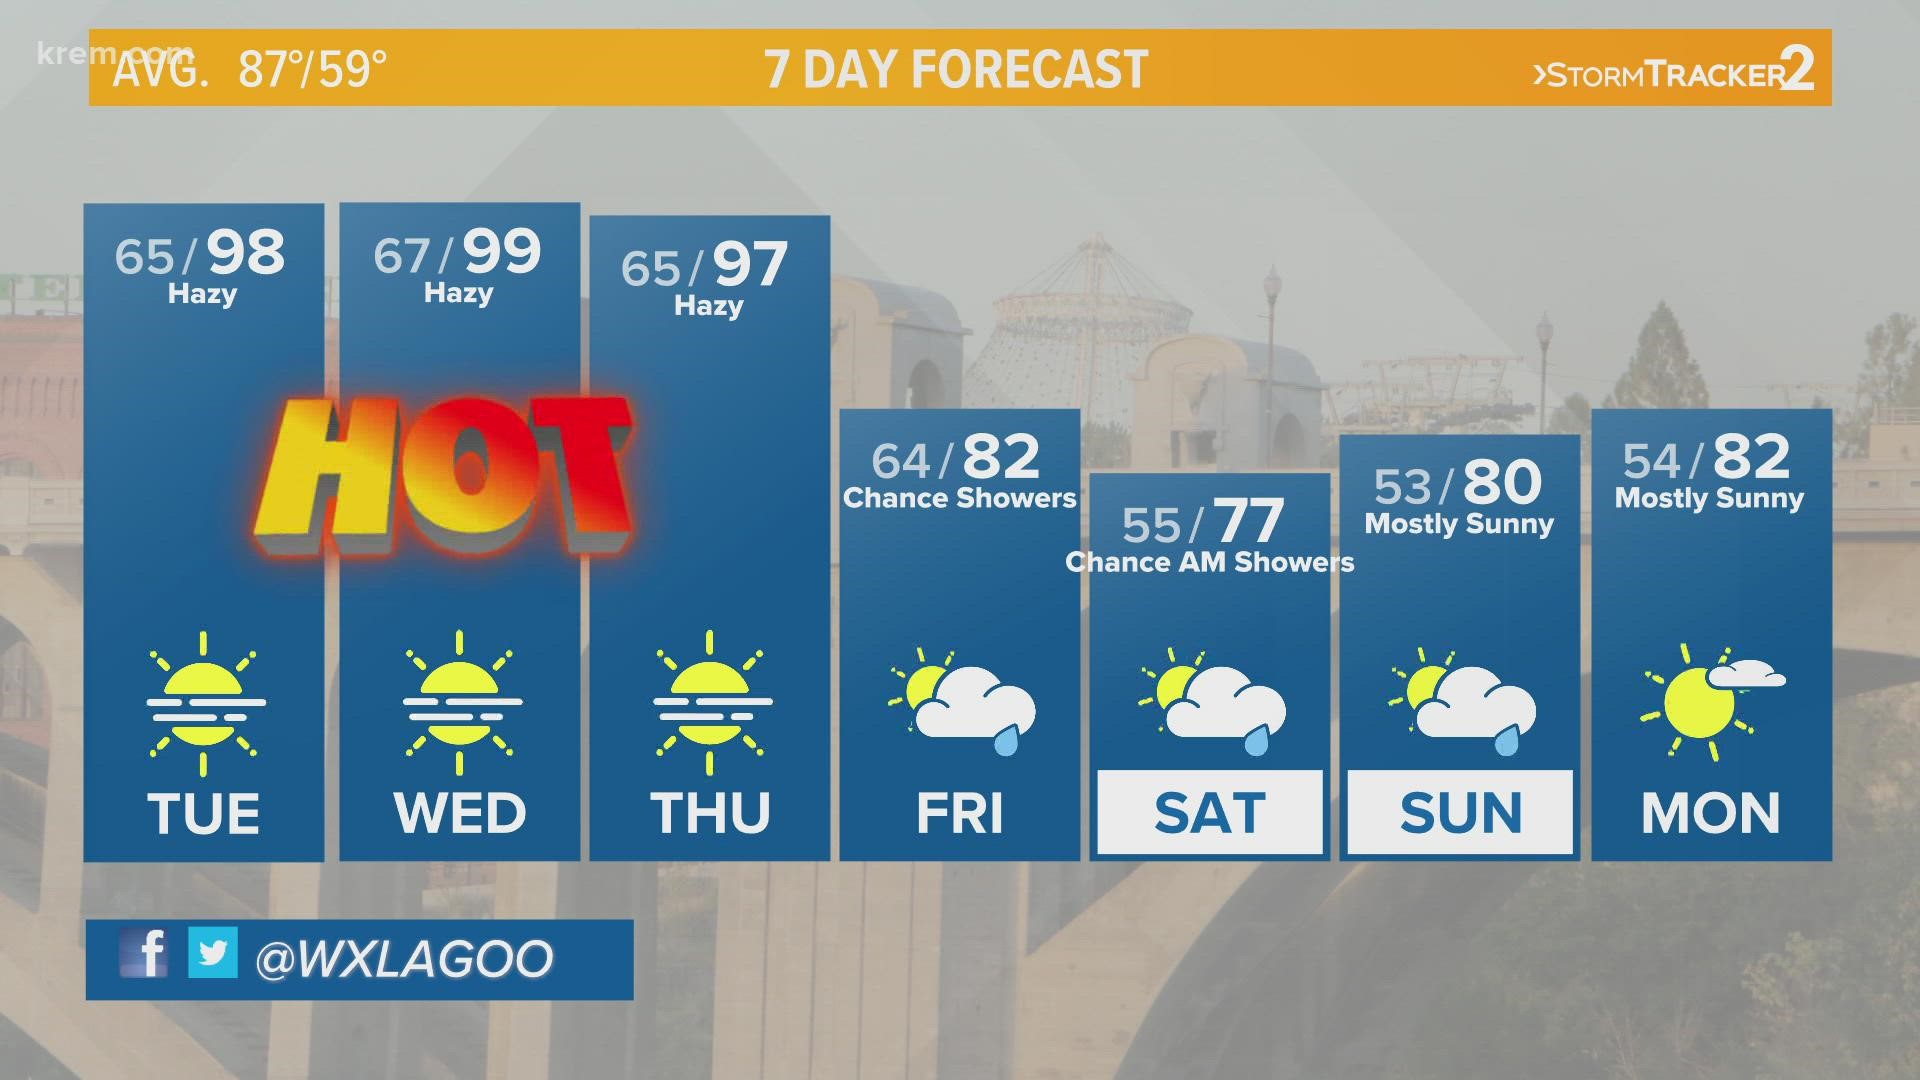 Wildfire smoke will lead to unhealthy air quality through Wednesday as temperatures near 100 degrees.